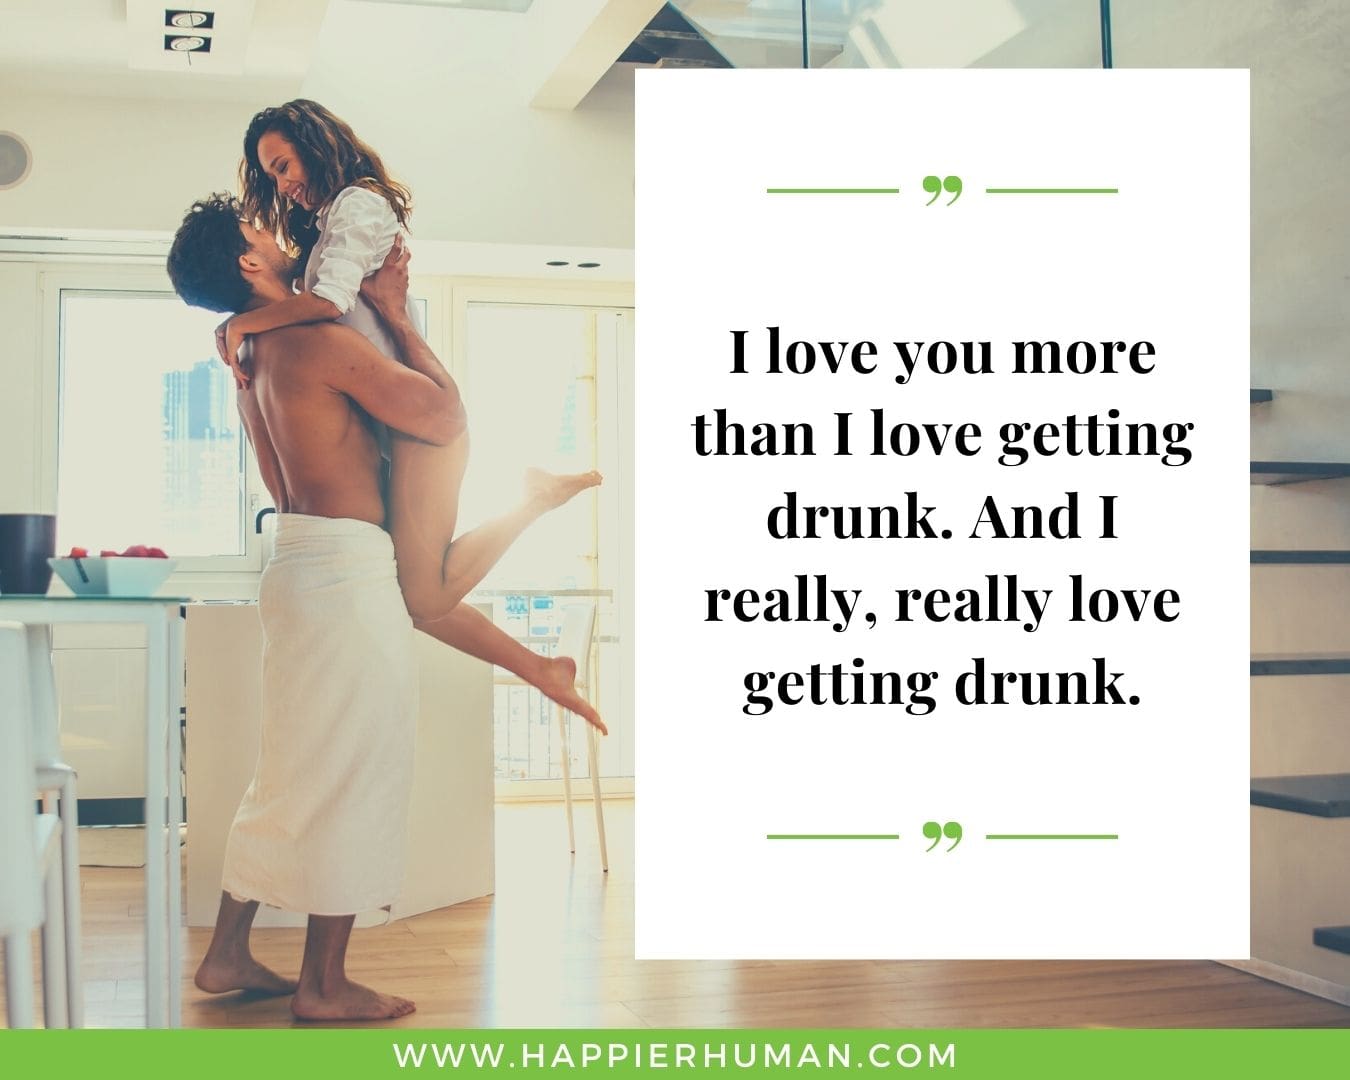 Amusing Love Quotes for Her - “I love you more than I love getting drunk. And I really, really love getting drunk.”